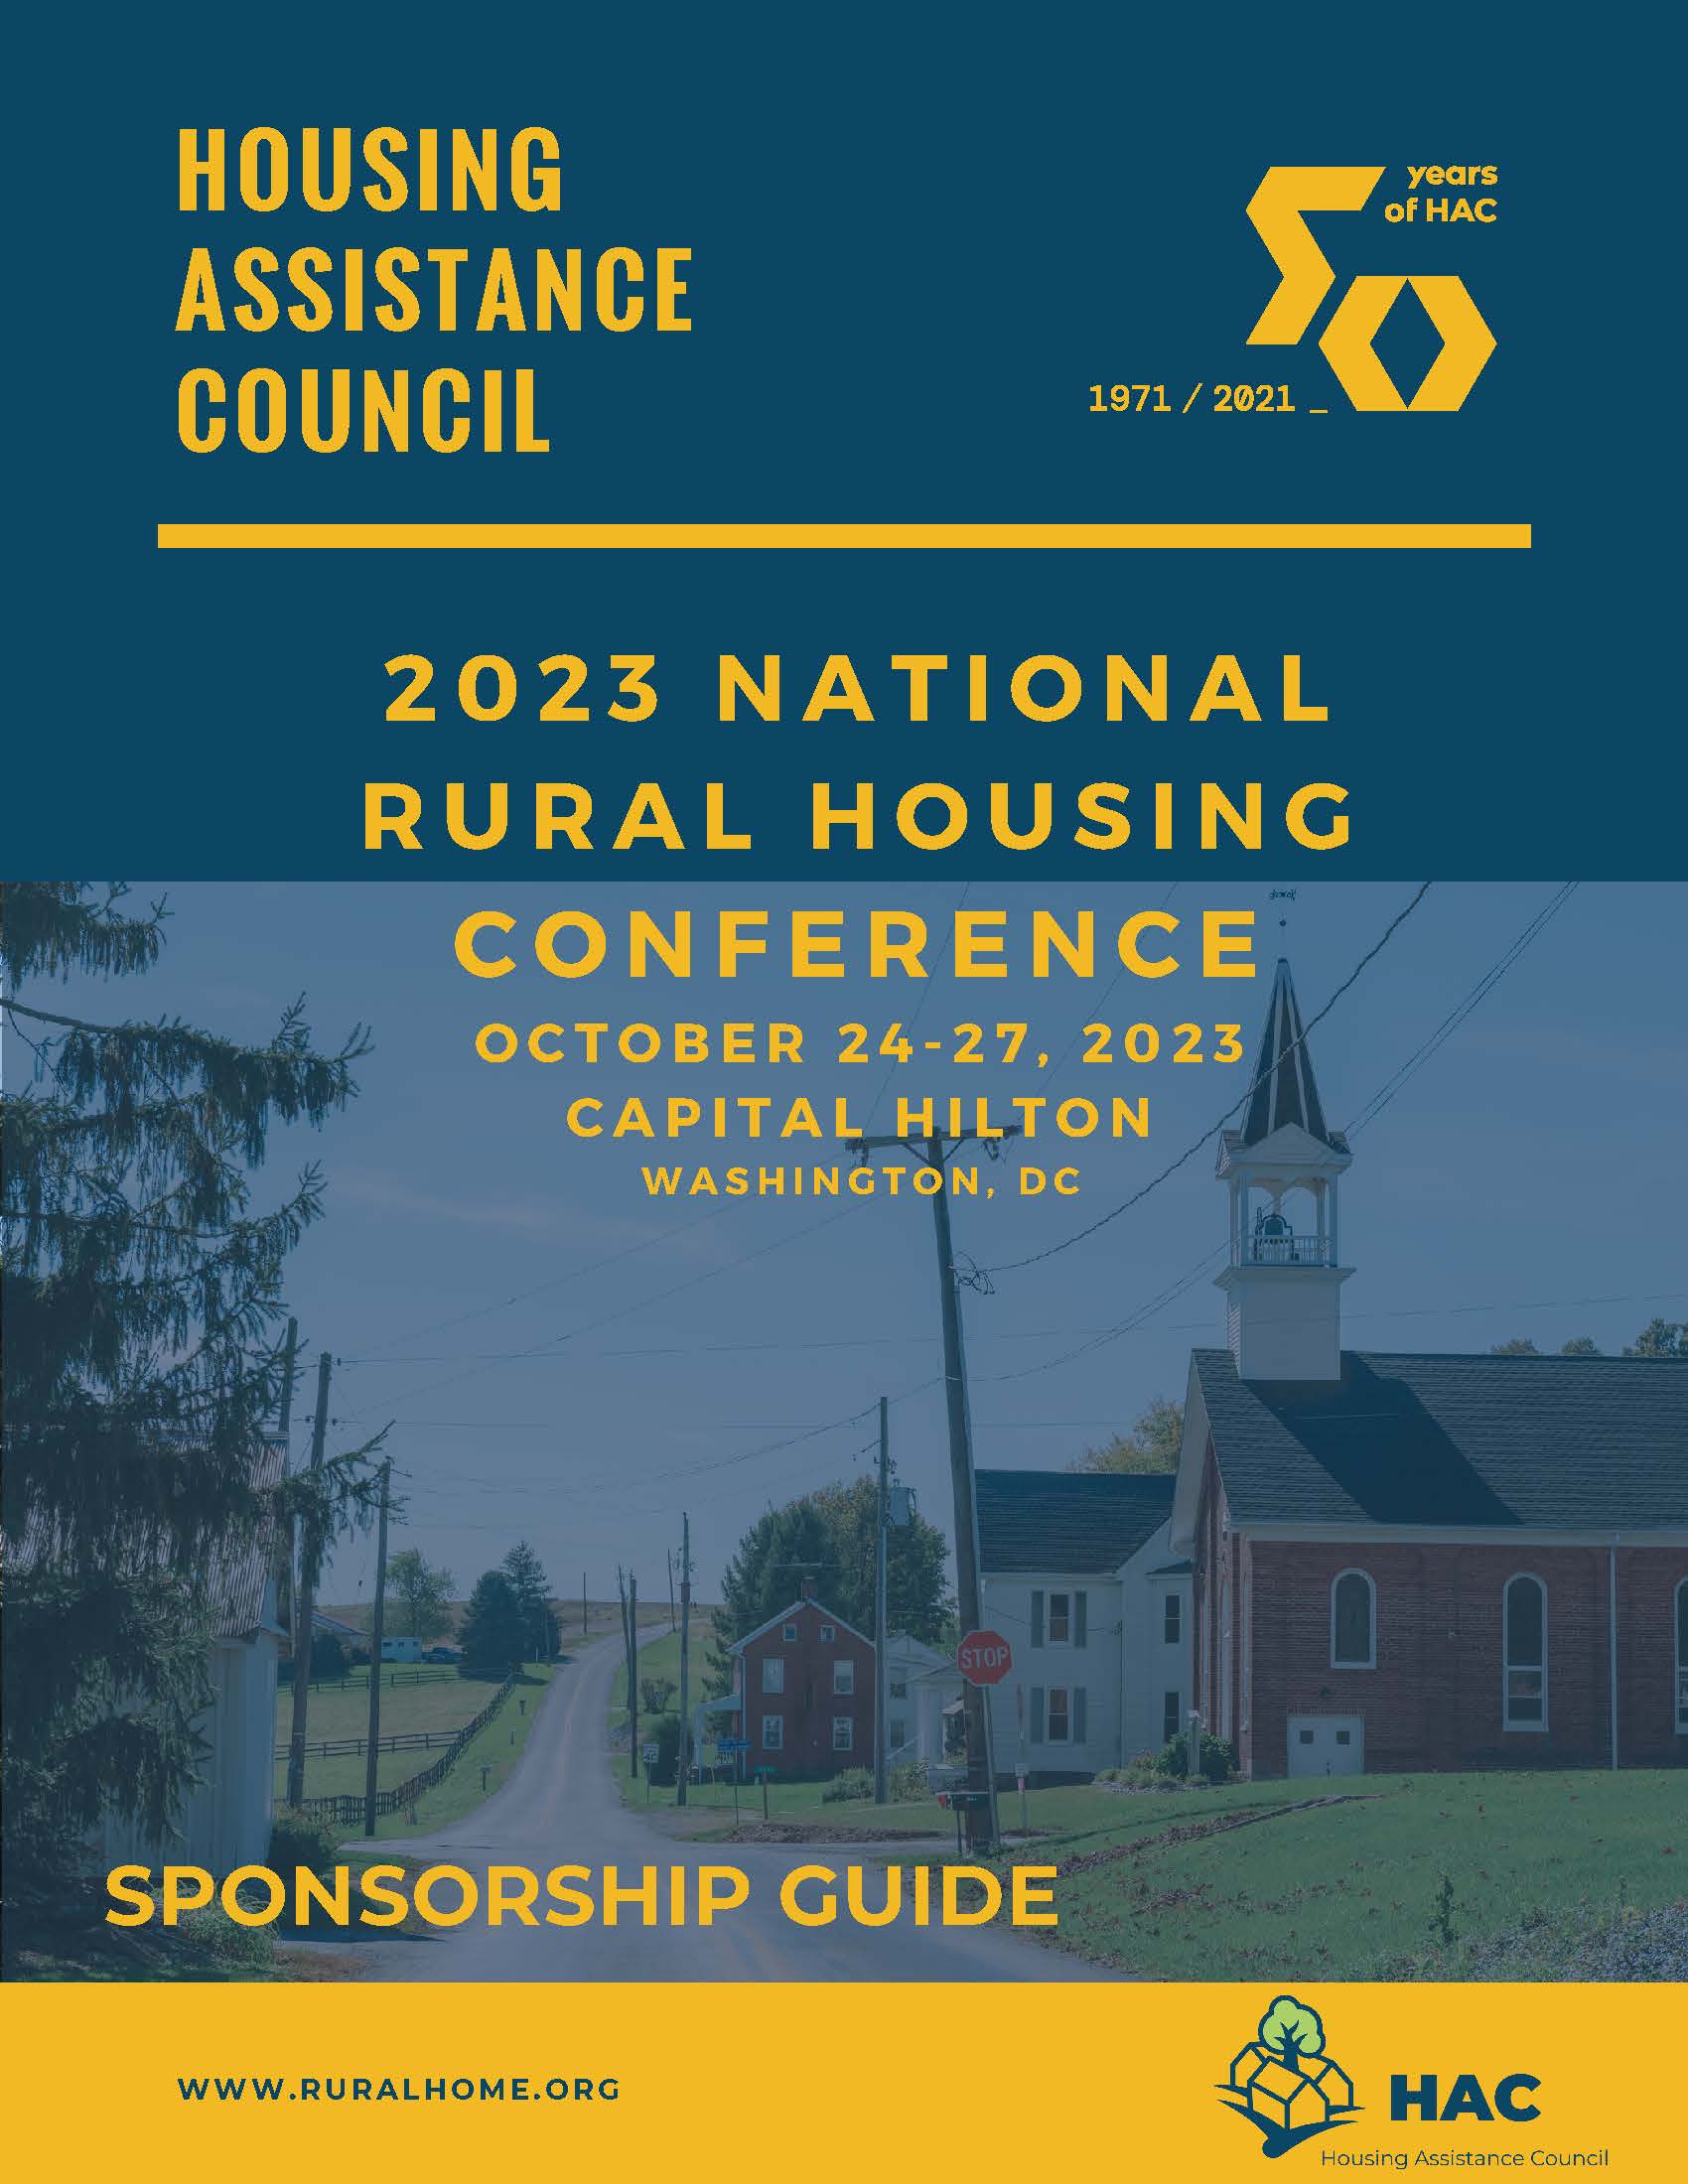 Sponsor the National Rural Housing Conference